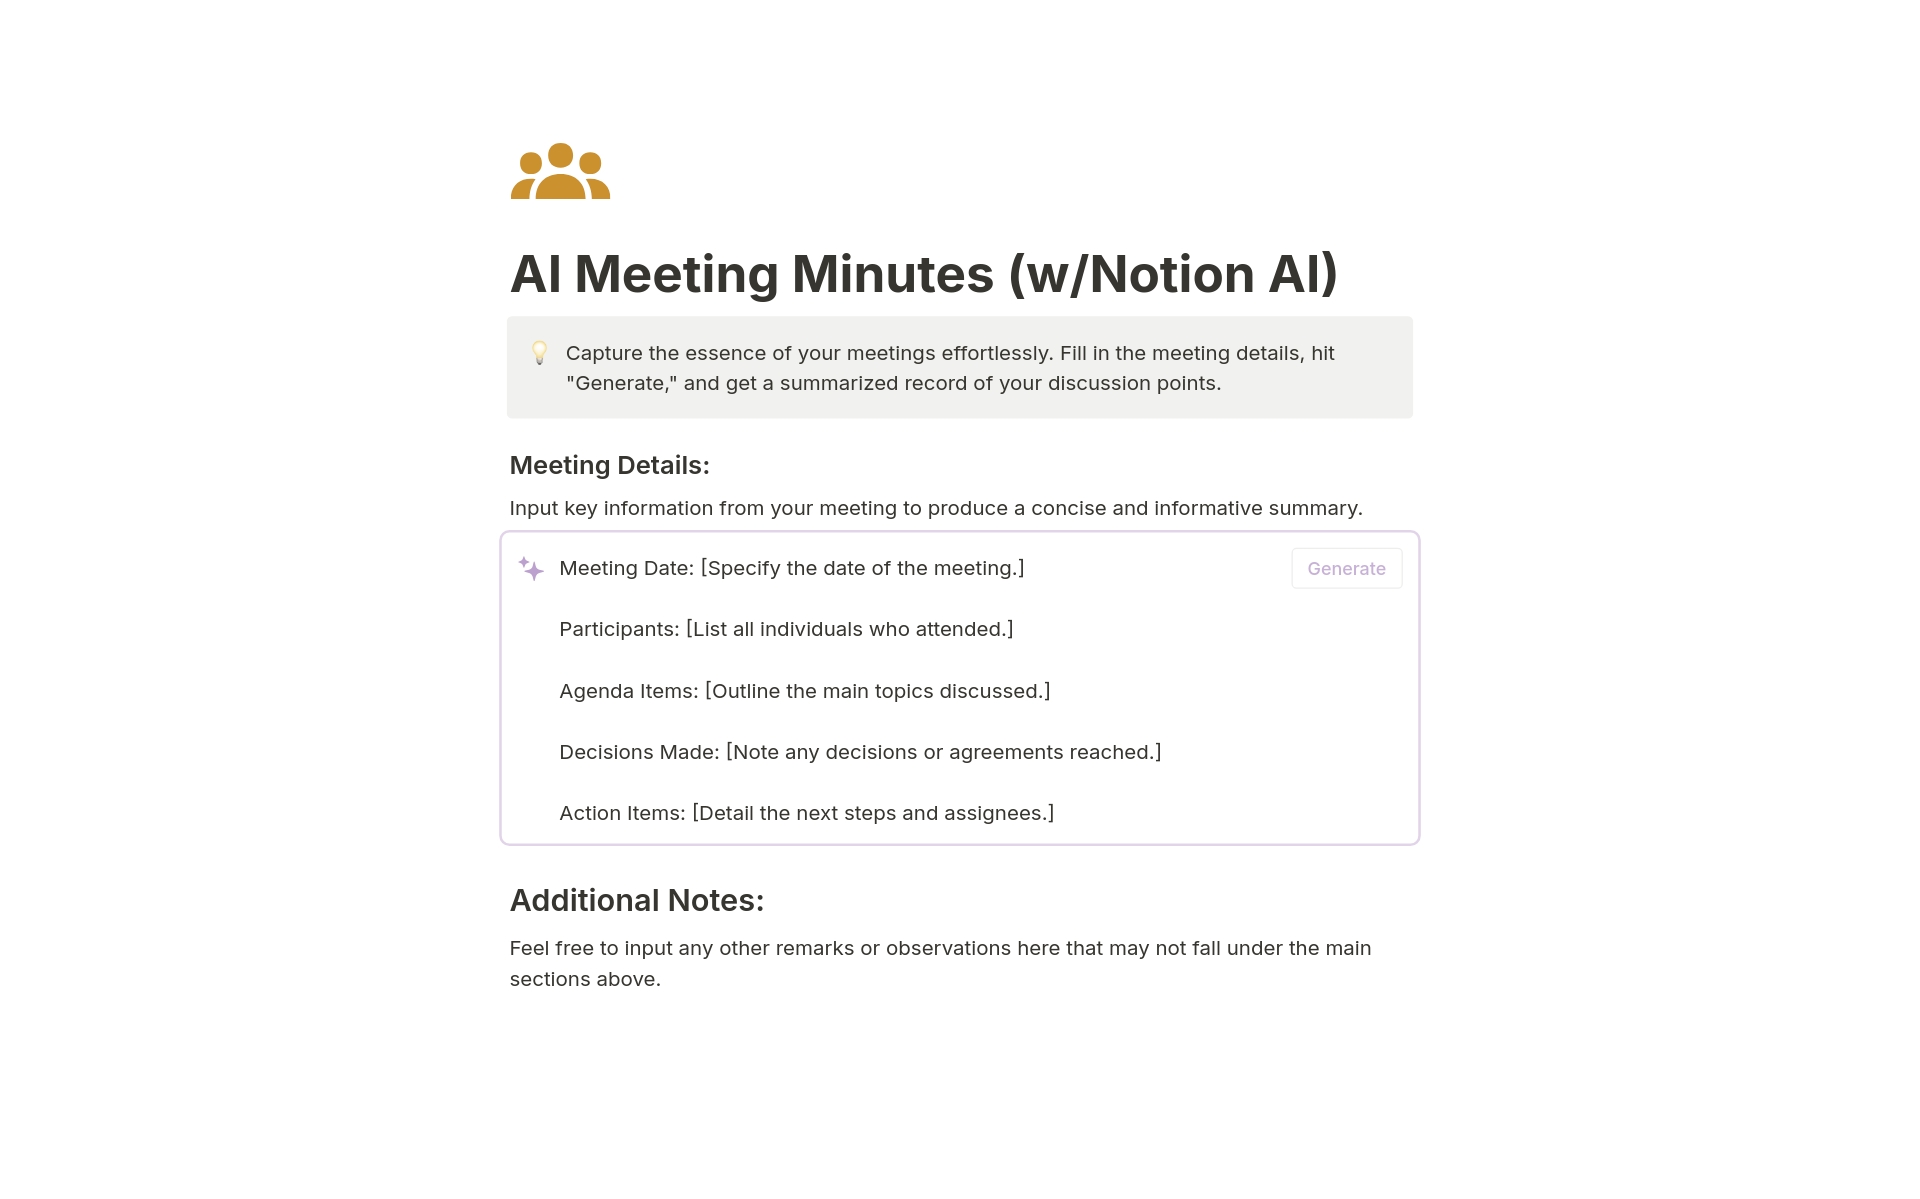 AI Meeting Minutes: Streamline your meeting follow-ups with this intuitive Notion template. Quickly convert your discussion points into a structured summary with a single click.